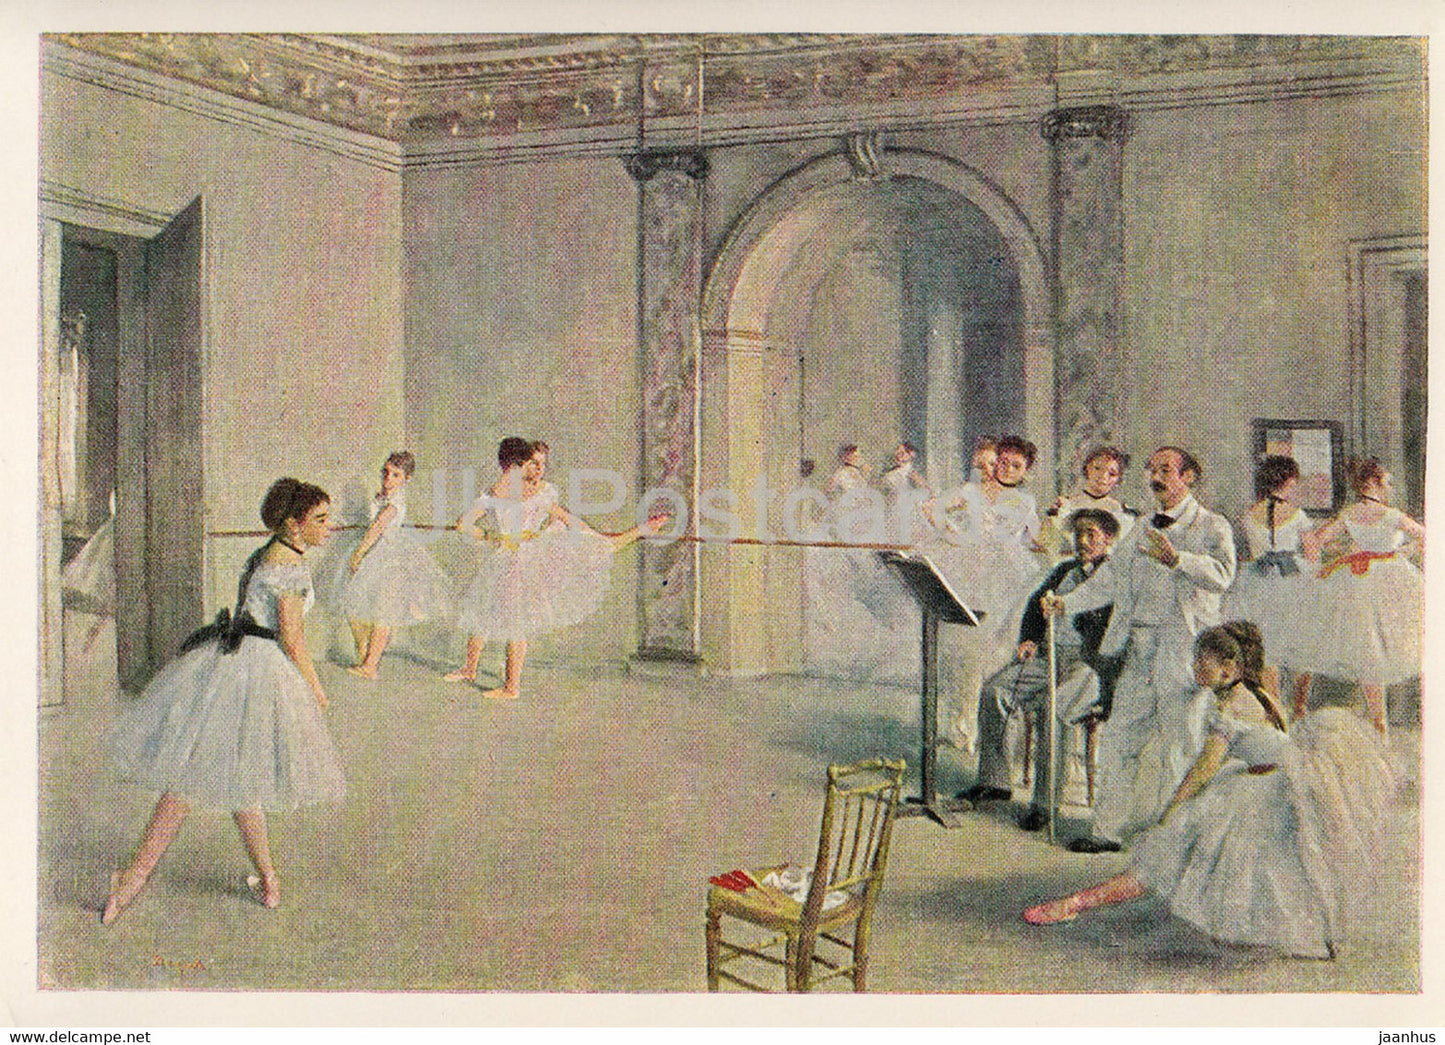 painting by Edgar Degas - Ballettsaal in der Oper - Study at the Opera - Ballet - French art - Germany - unused - JH Postcards